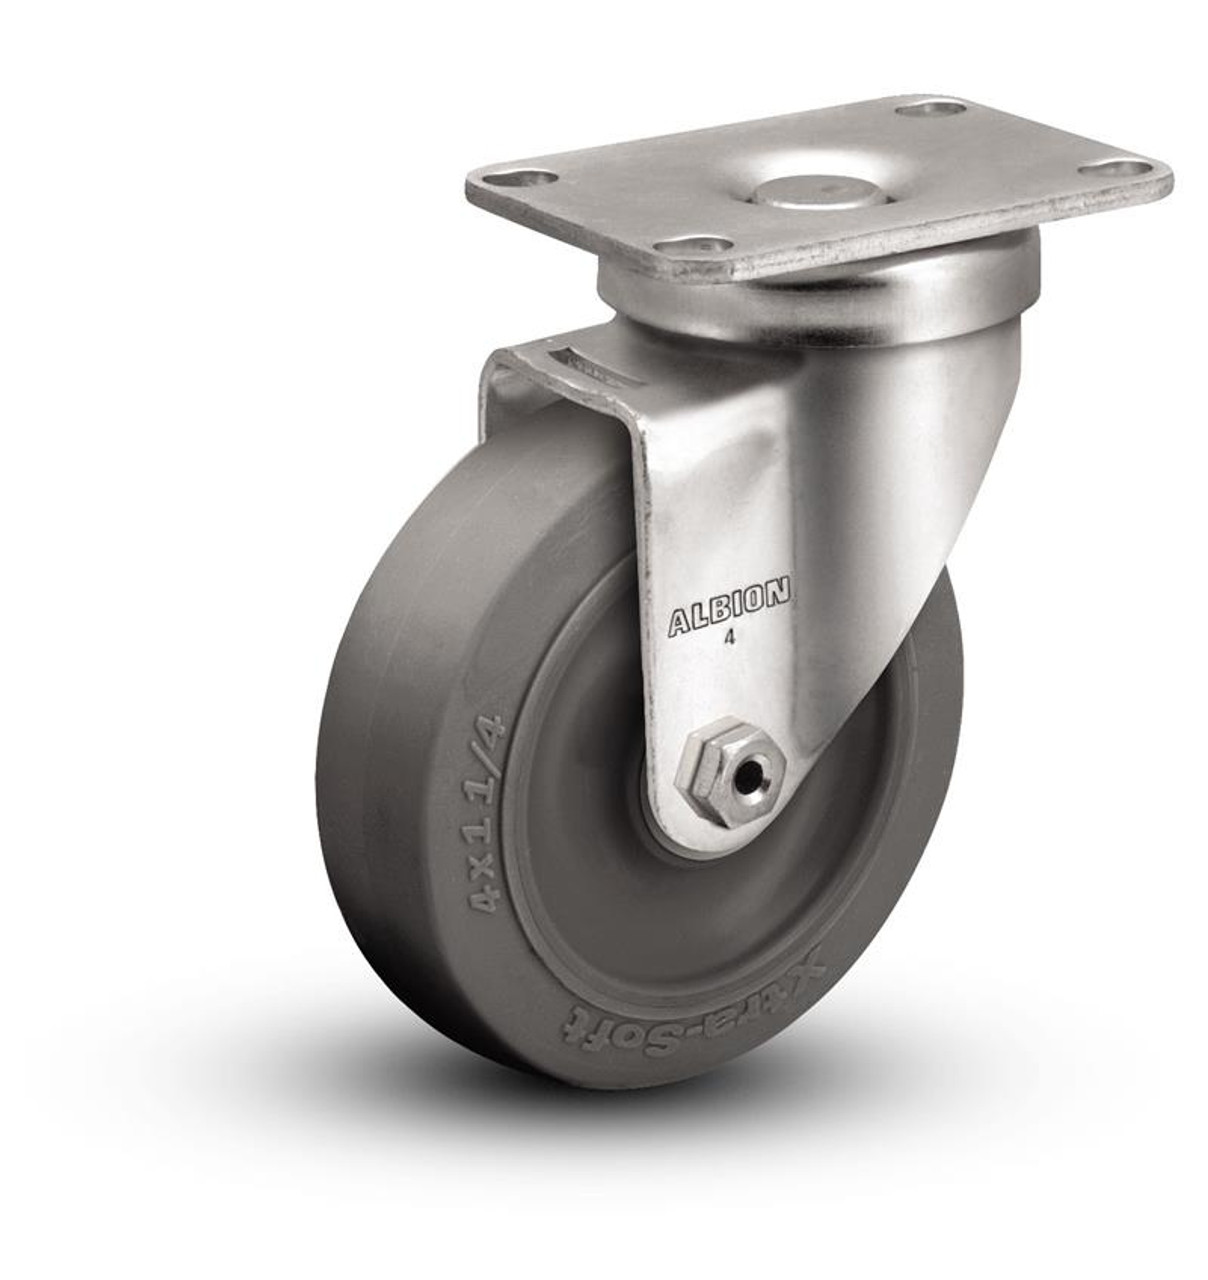 02XS03031S 3" swivel caster with extra-soft rubber tread wheel